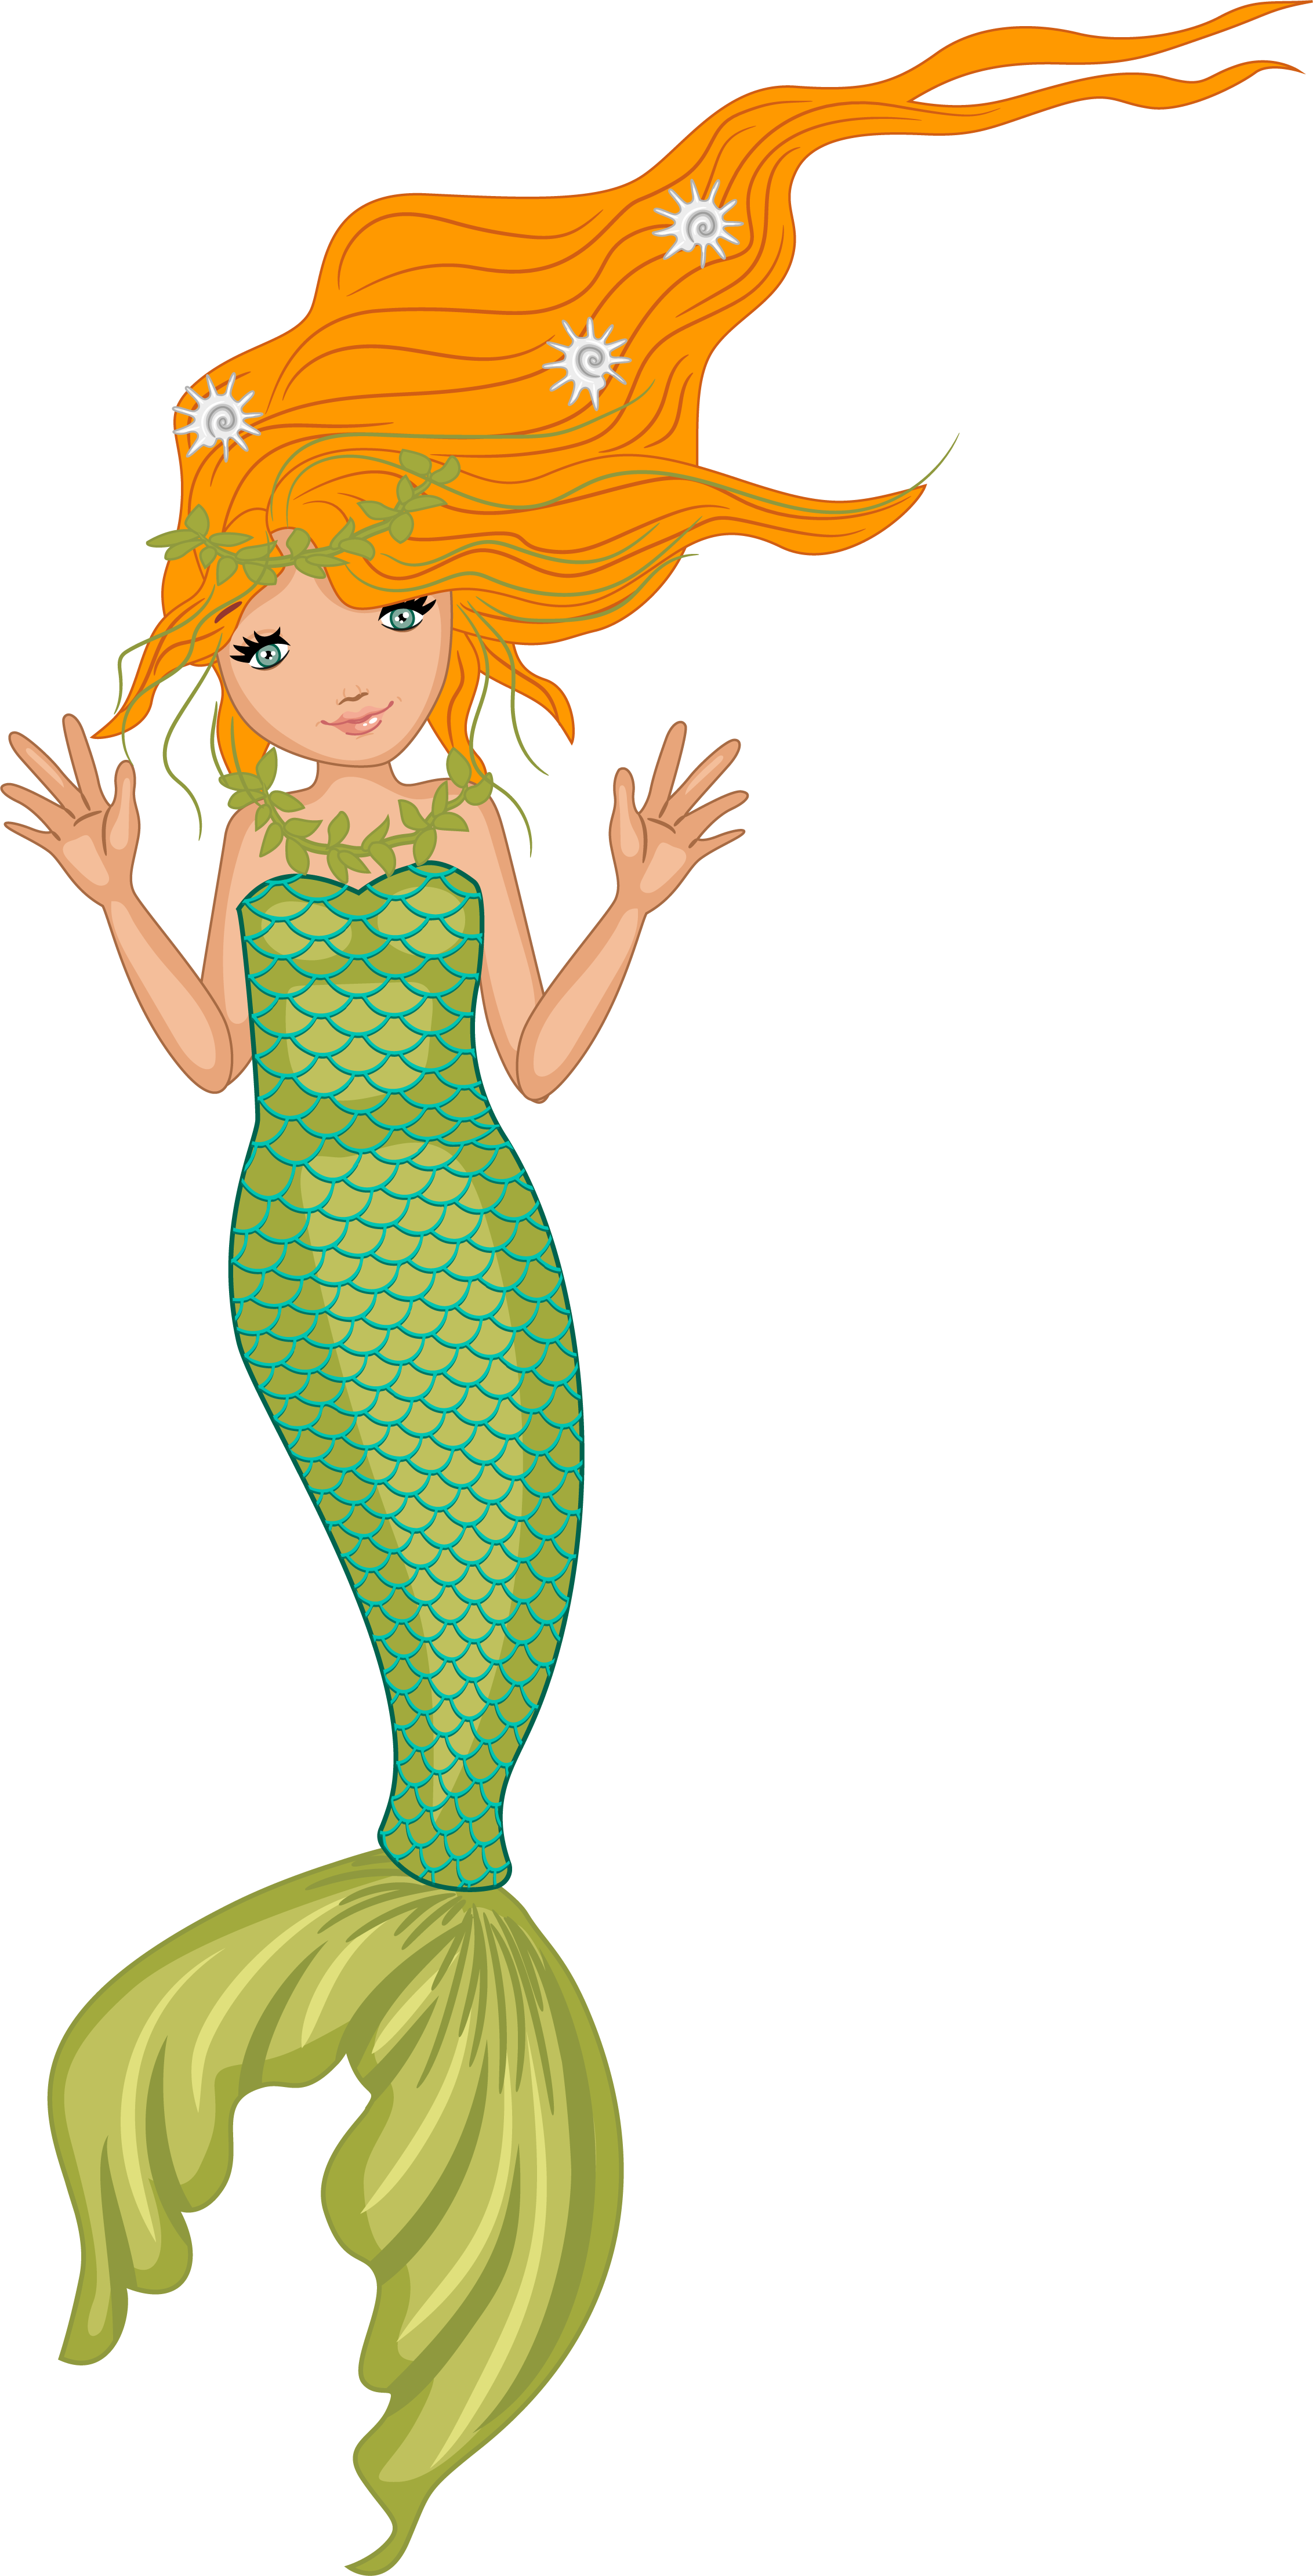 A standing mermaid with a green tail.